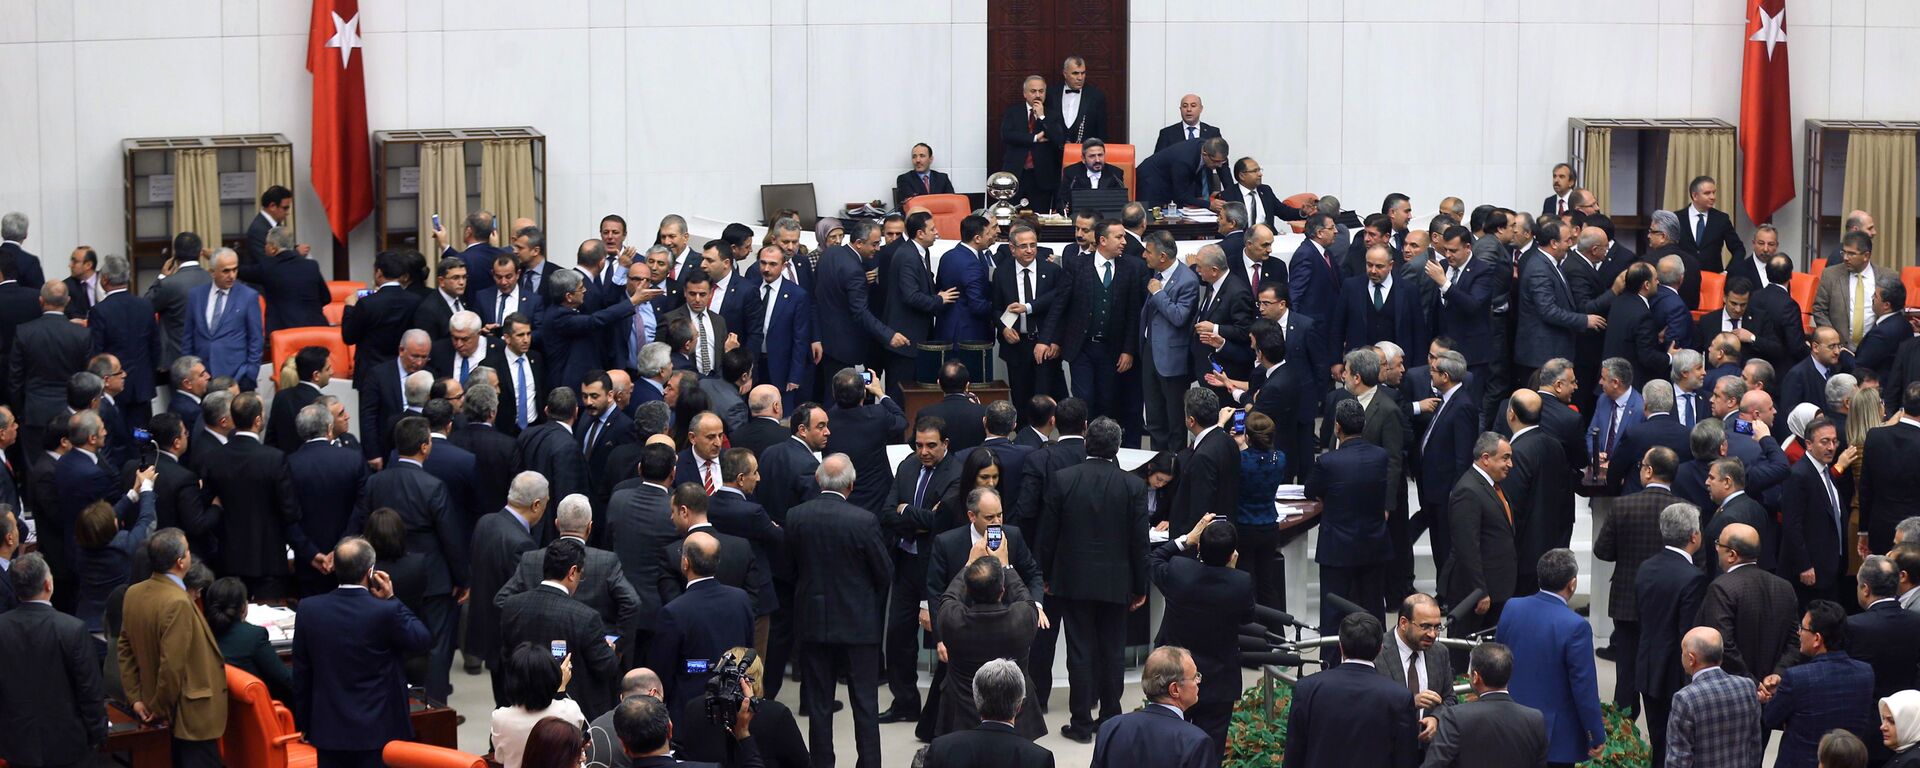 Turkish lawmakers cast their votes during a debate for a proposal for change in the constitution on January 10, 2017 at the Turkish parliament in Ankara. Turkey's parliament on January 9, 2017 began debating a controversial new draft constitution aimed at expanding the powers of the presidency under Recep Tayyip Erdogan - Sputnik International, 1920, 27.12.2023